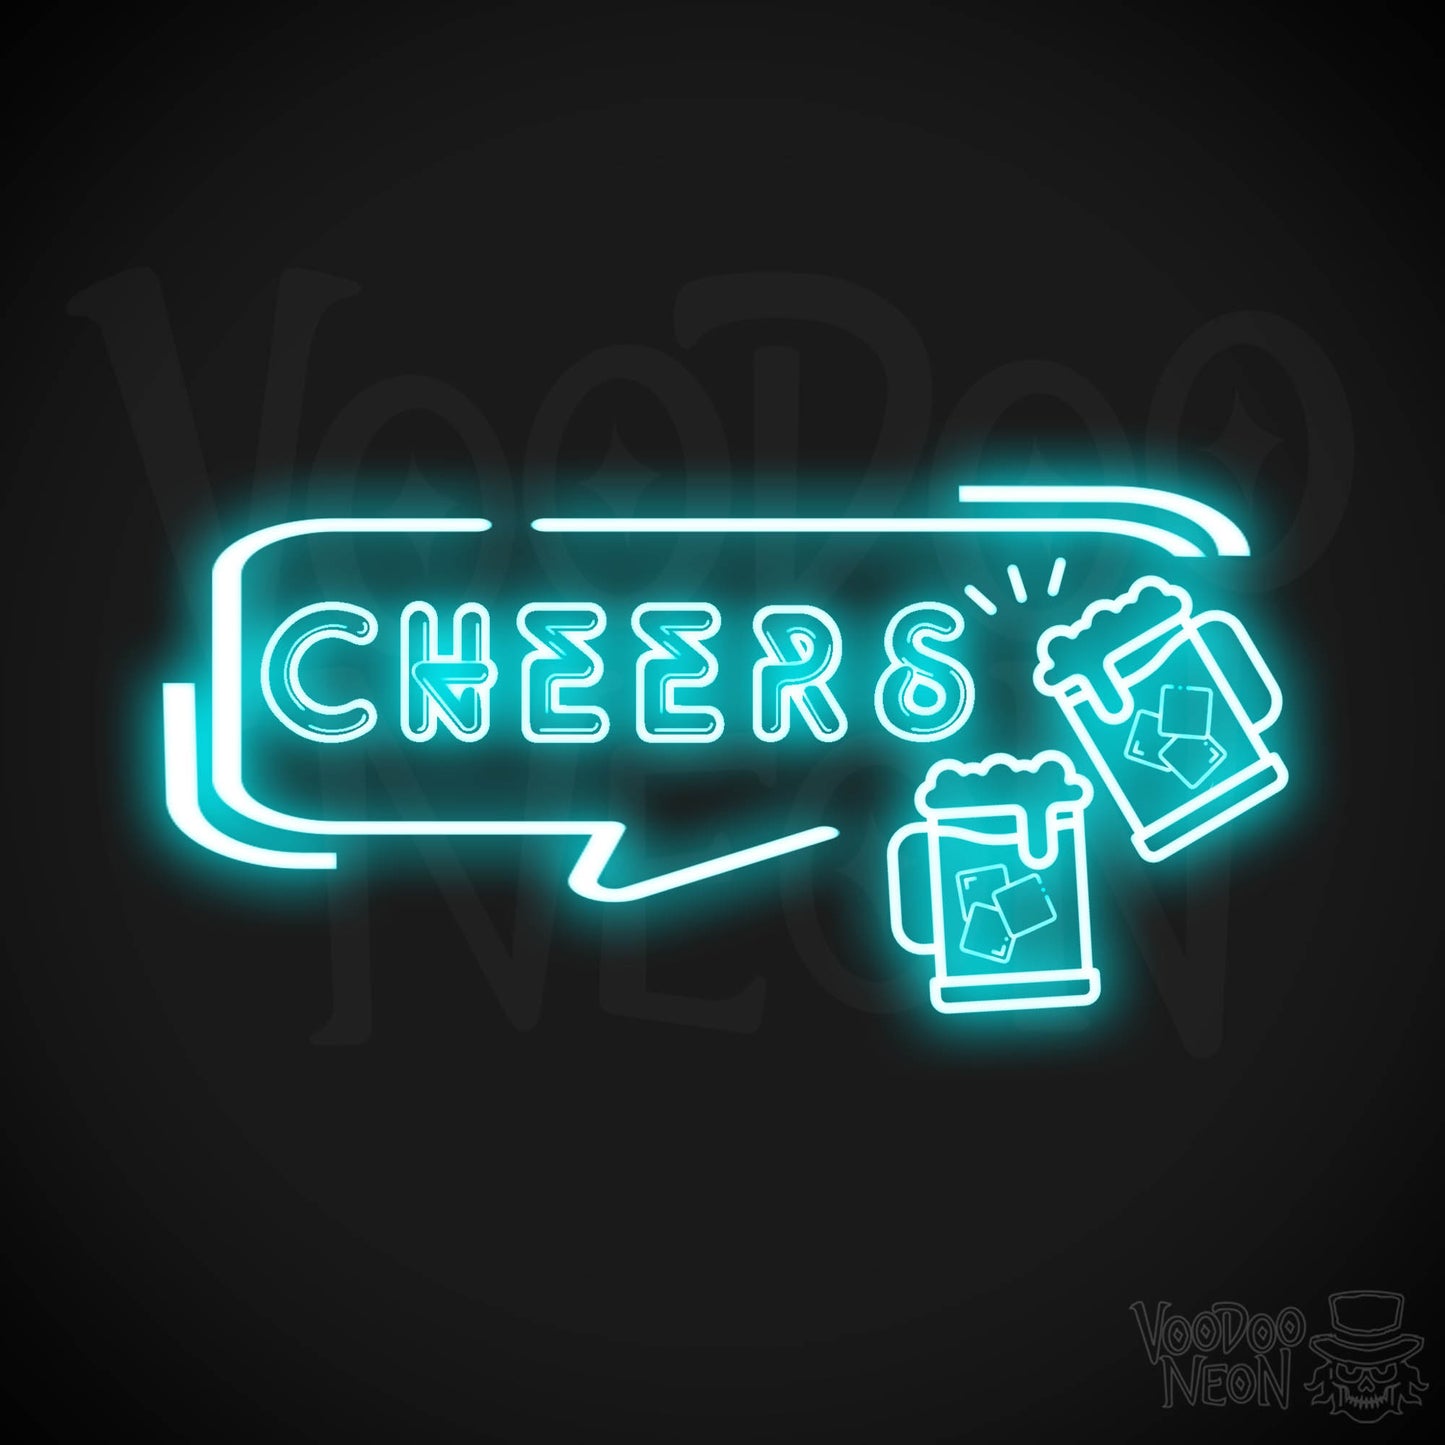 Cheers Neon Sign - Neon Cheers Bar Sign - LED Neon Wall Art - Color Ice Blue